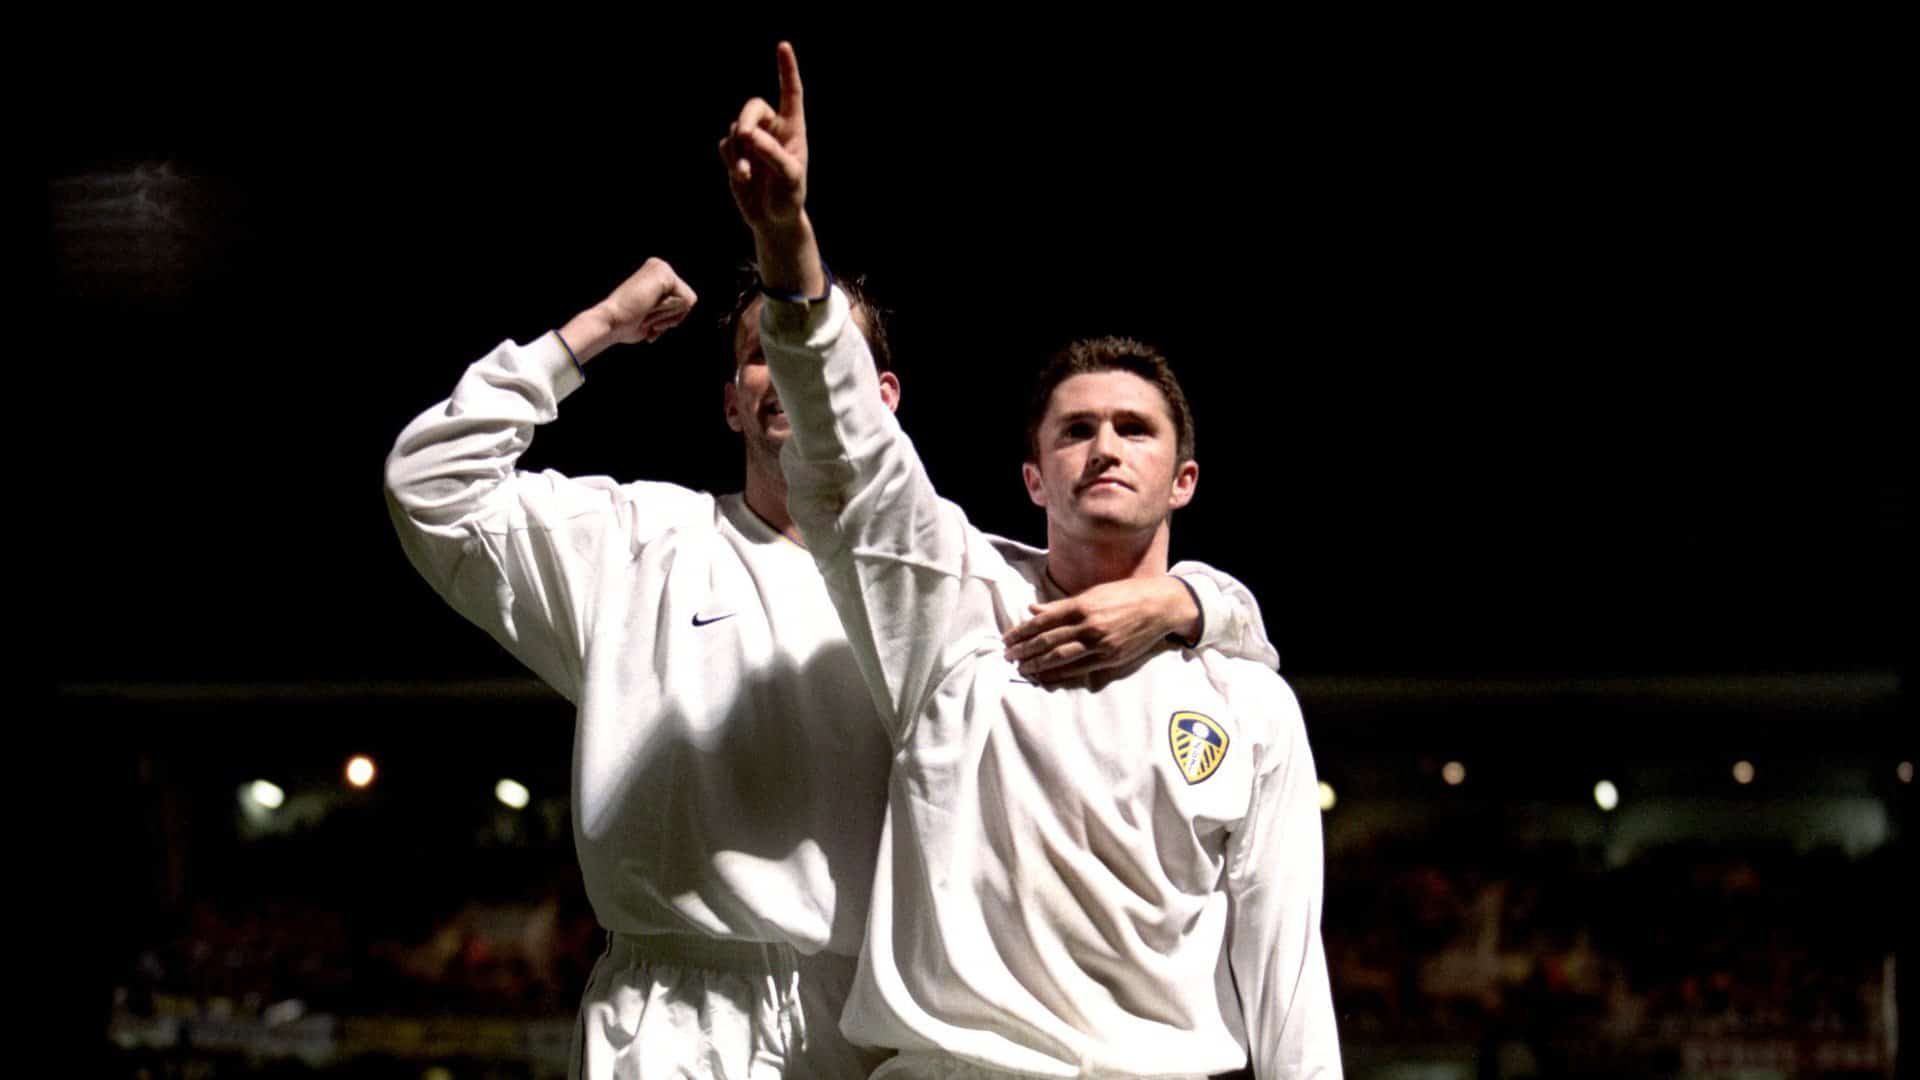 Robbie Keane celebrating his goal for Leeds against Troyes by raising his finger in the air and taking a hug of Eirik Bakke. Unusually, his all-white Nike Leeds shirt is sponsorless, because of the French ban on alcohol advertising meaning no Strongbow allowed